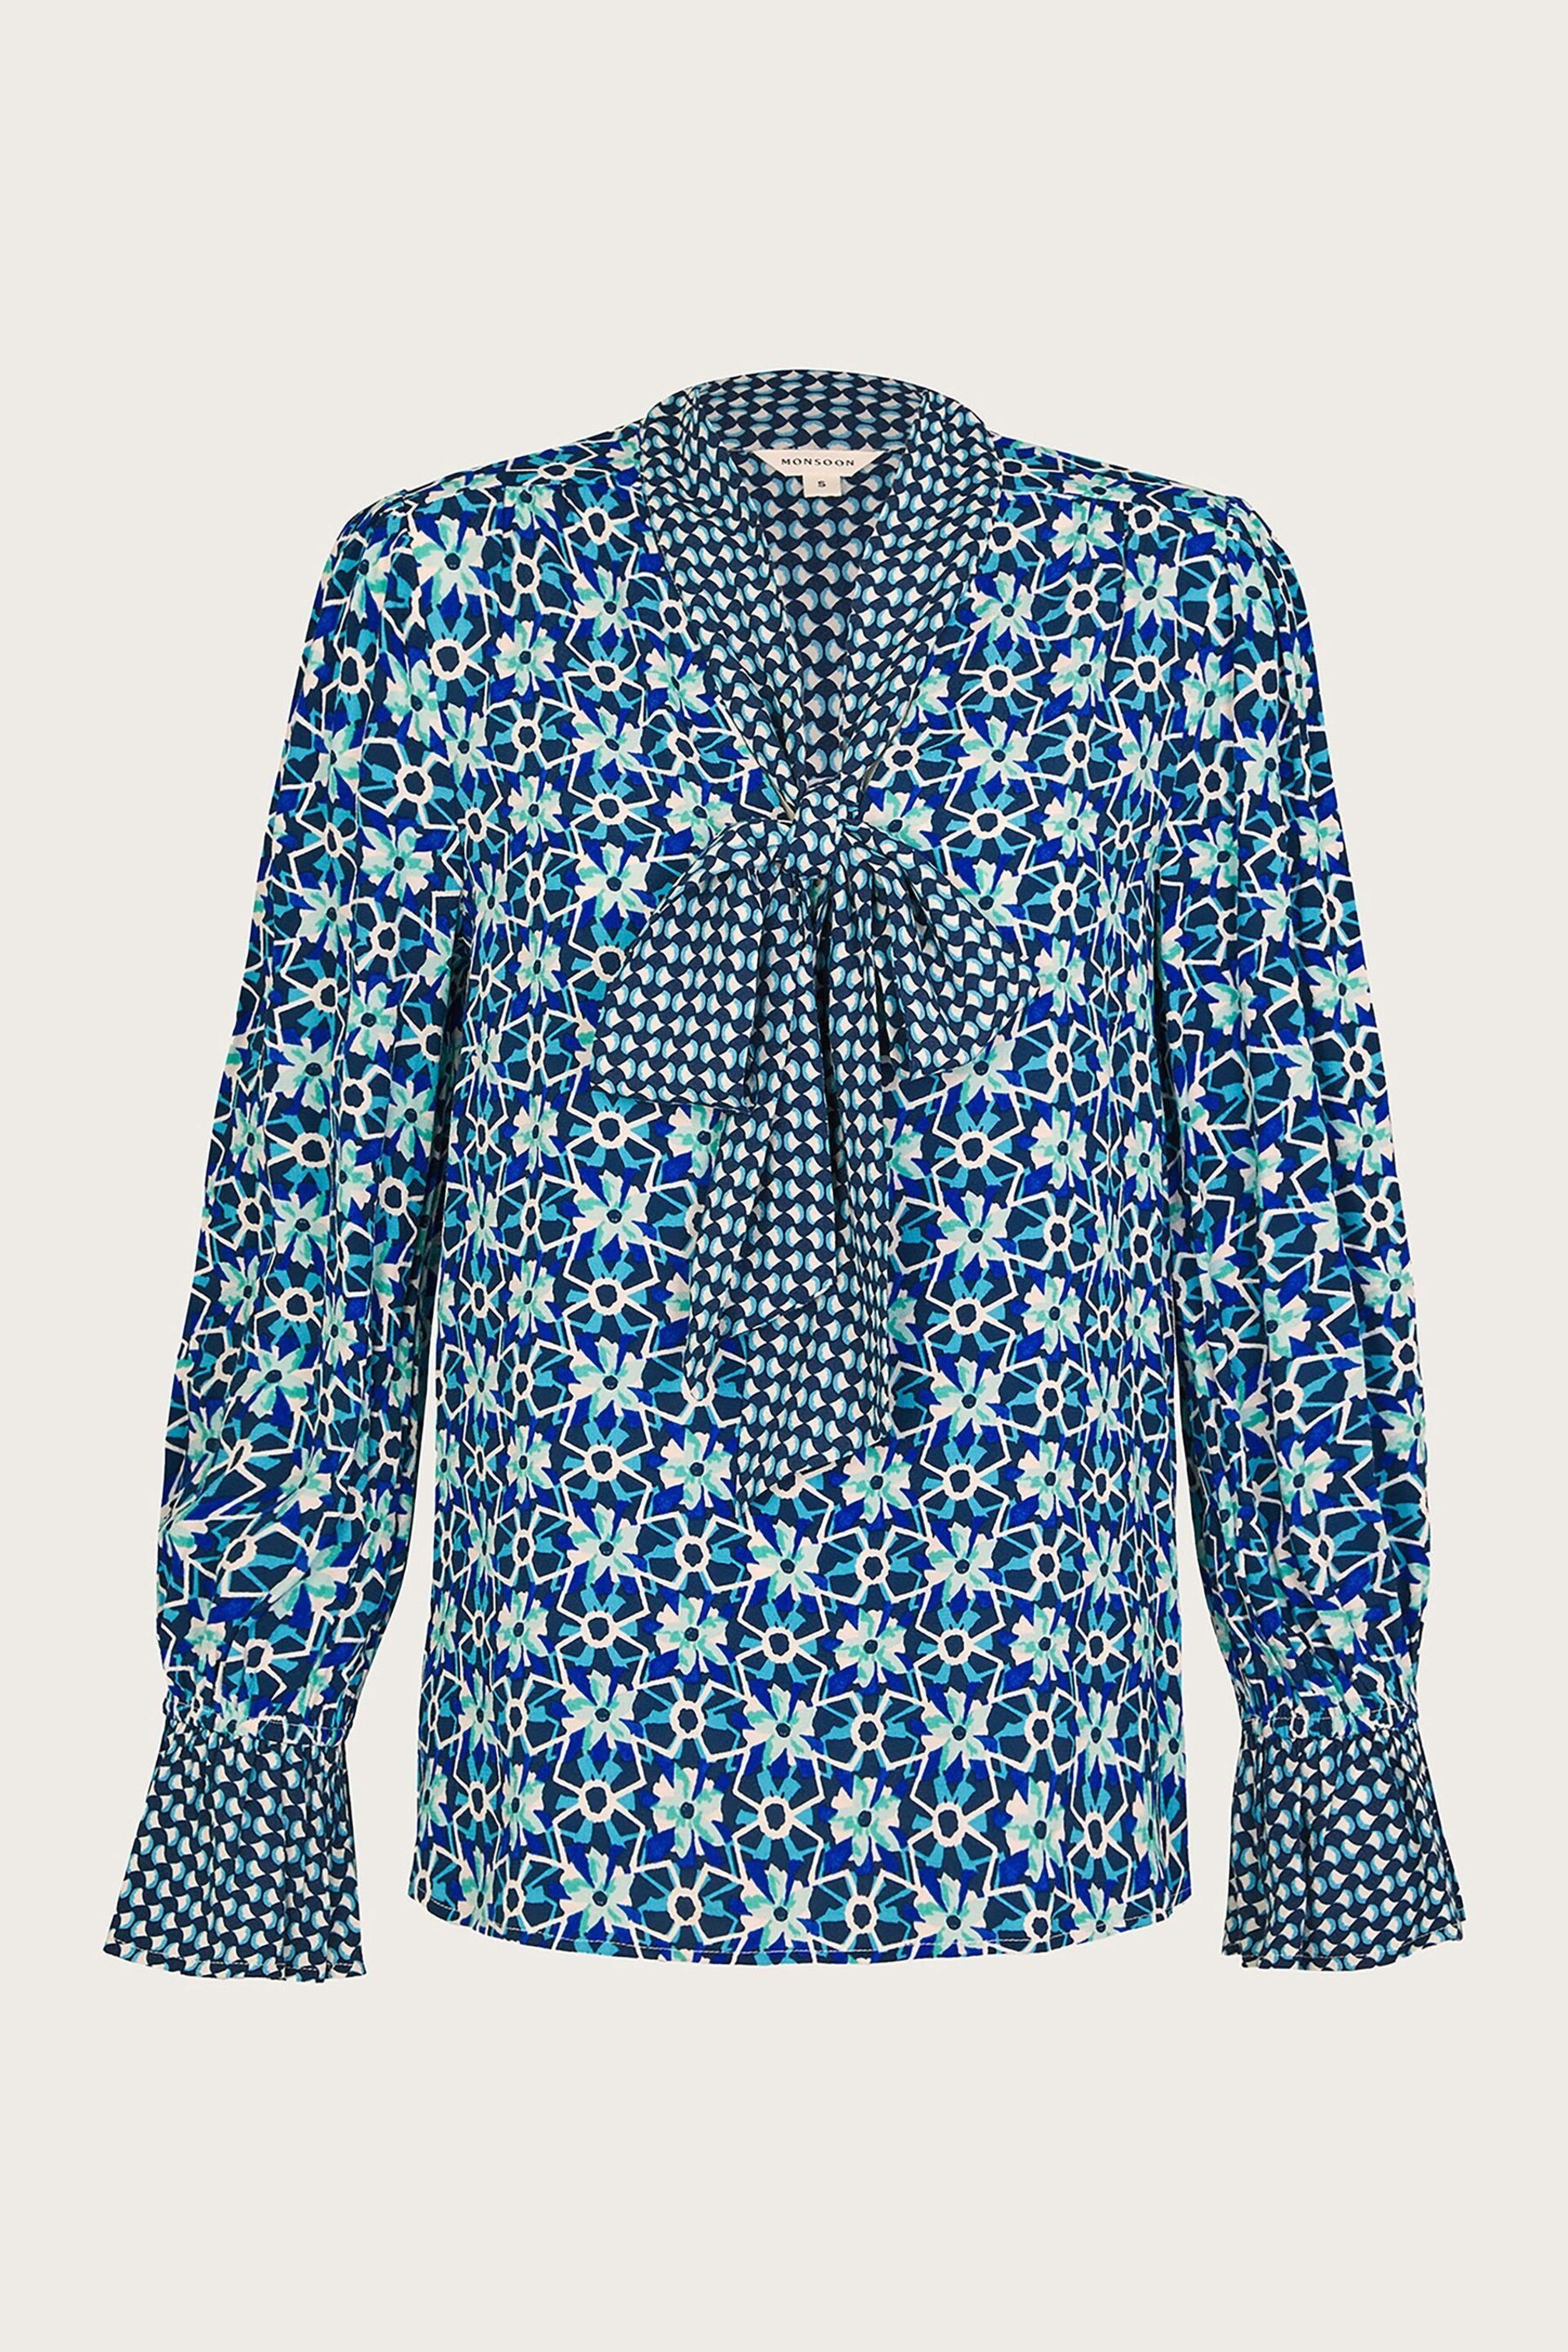 Monsoon Blue Clover Print Pussybow Blouse - Image 5 of 5